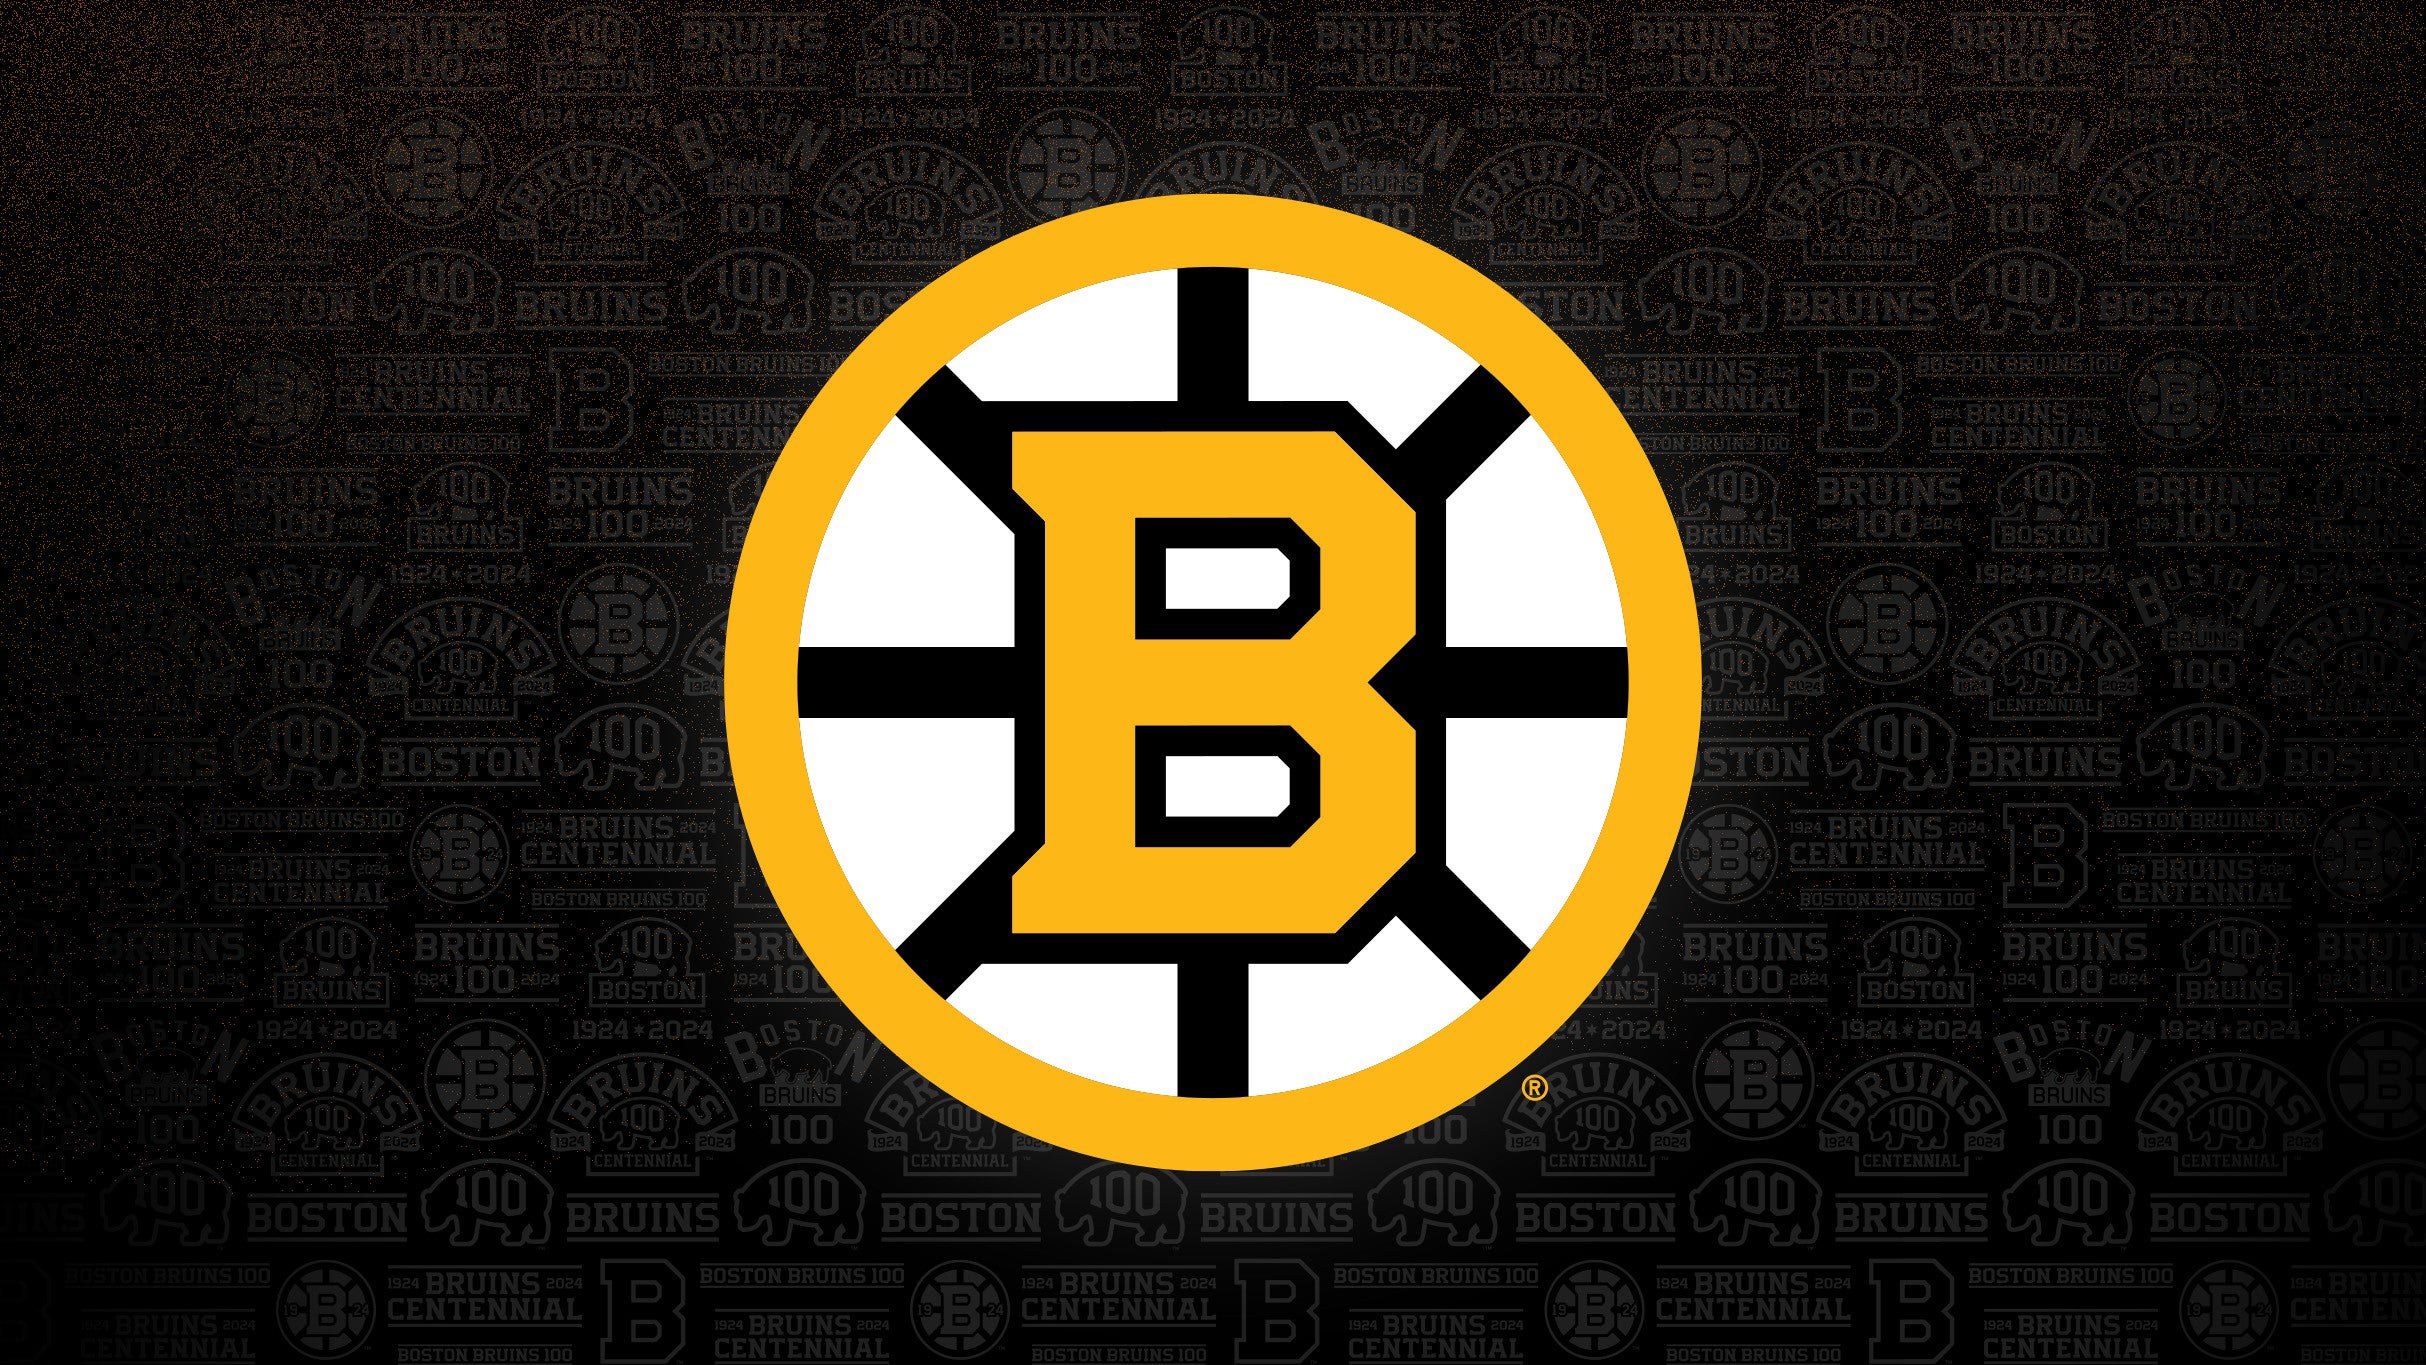 Second Round:  Panthers at Bruins Rd 2 Hm Gm 2